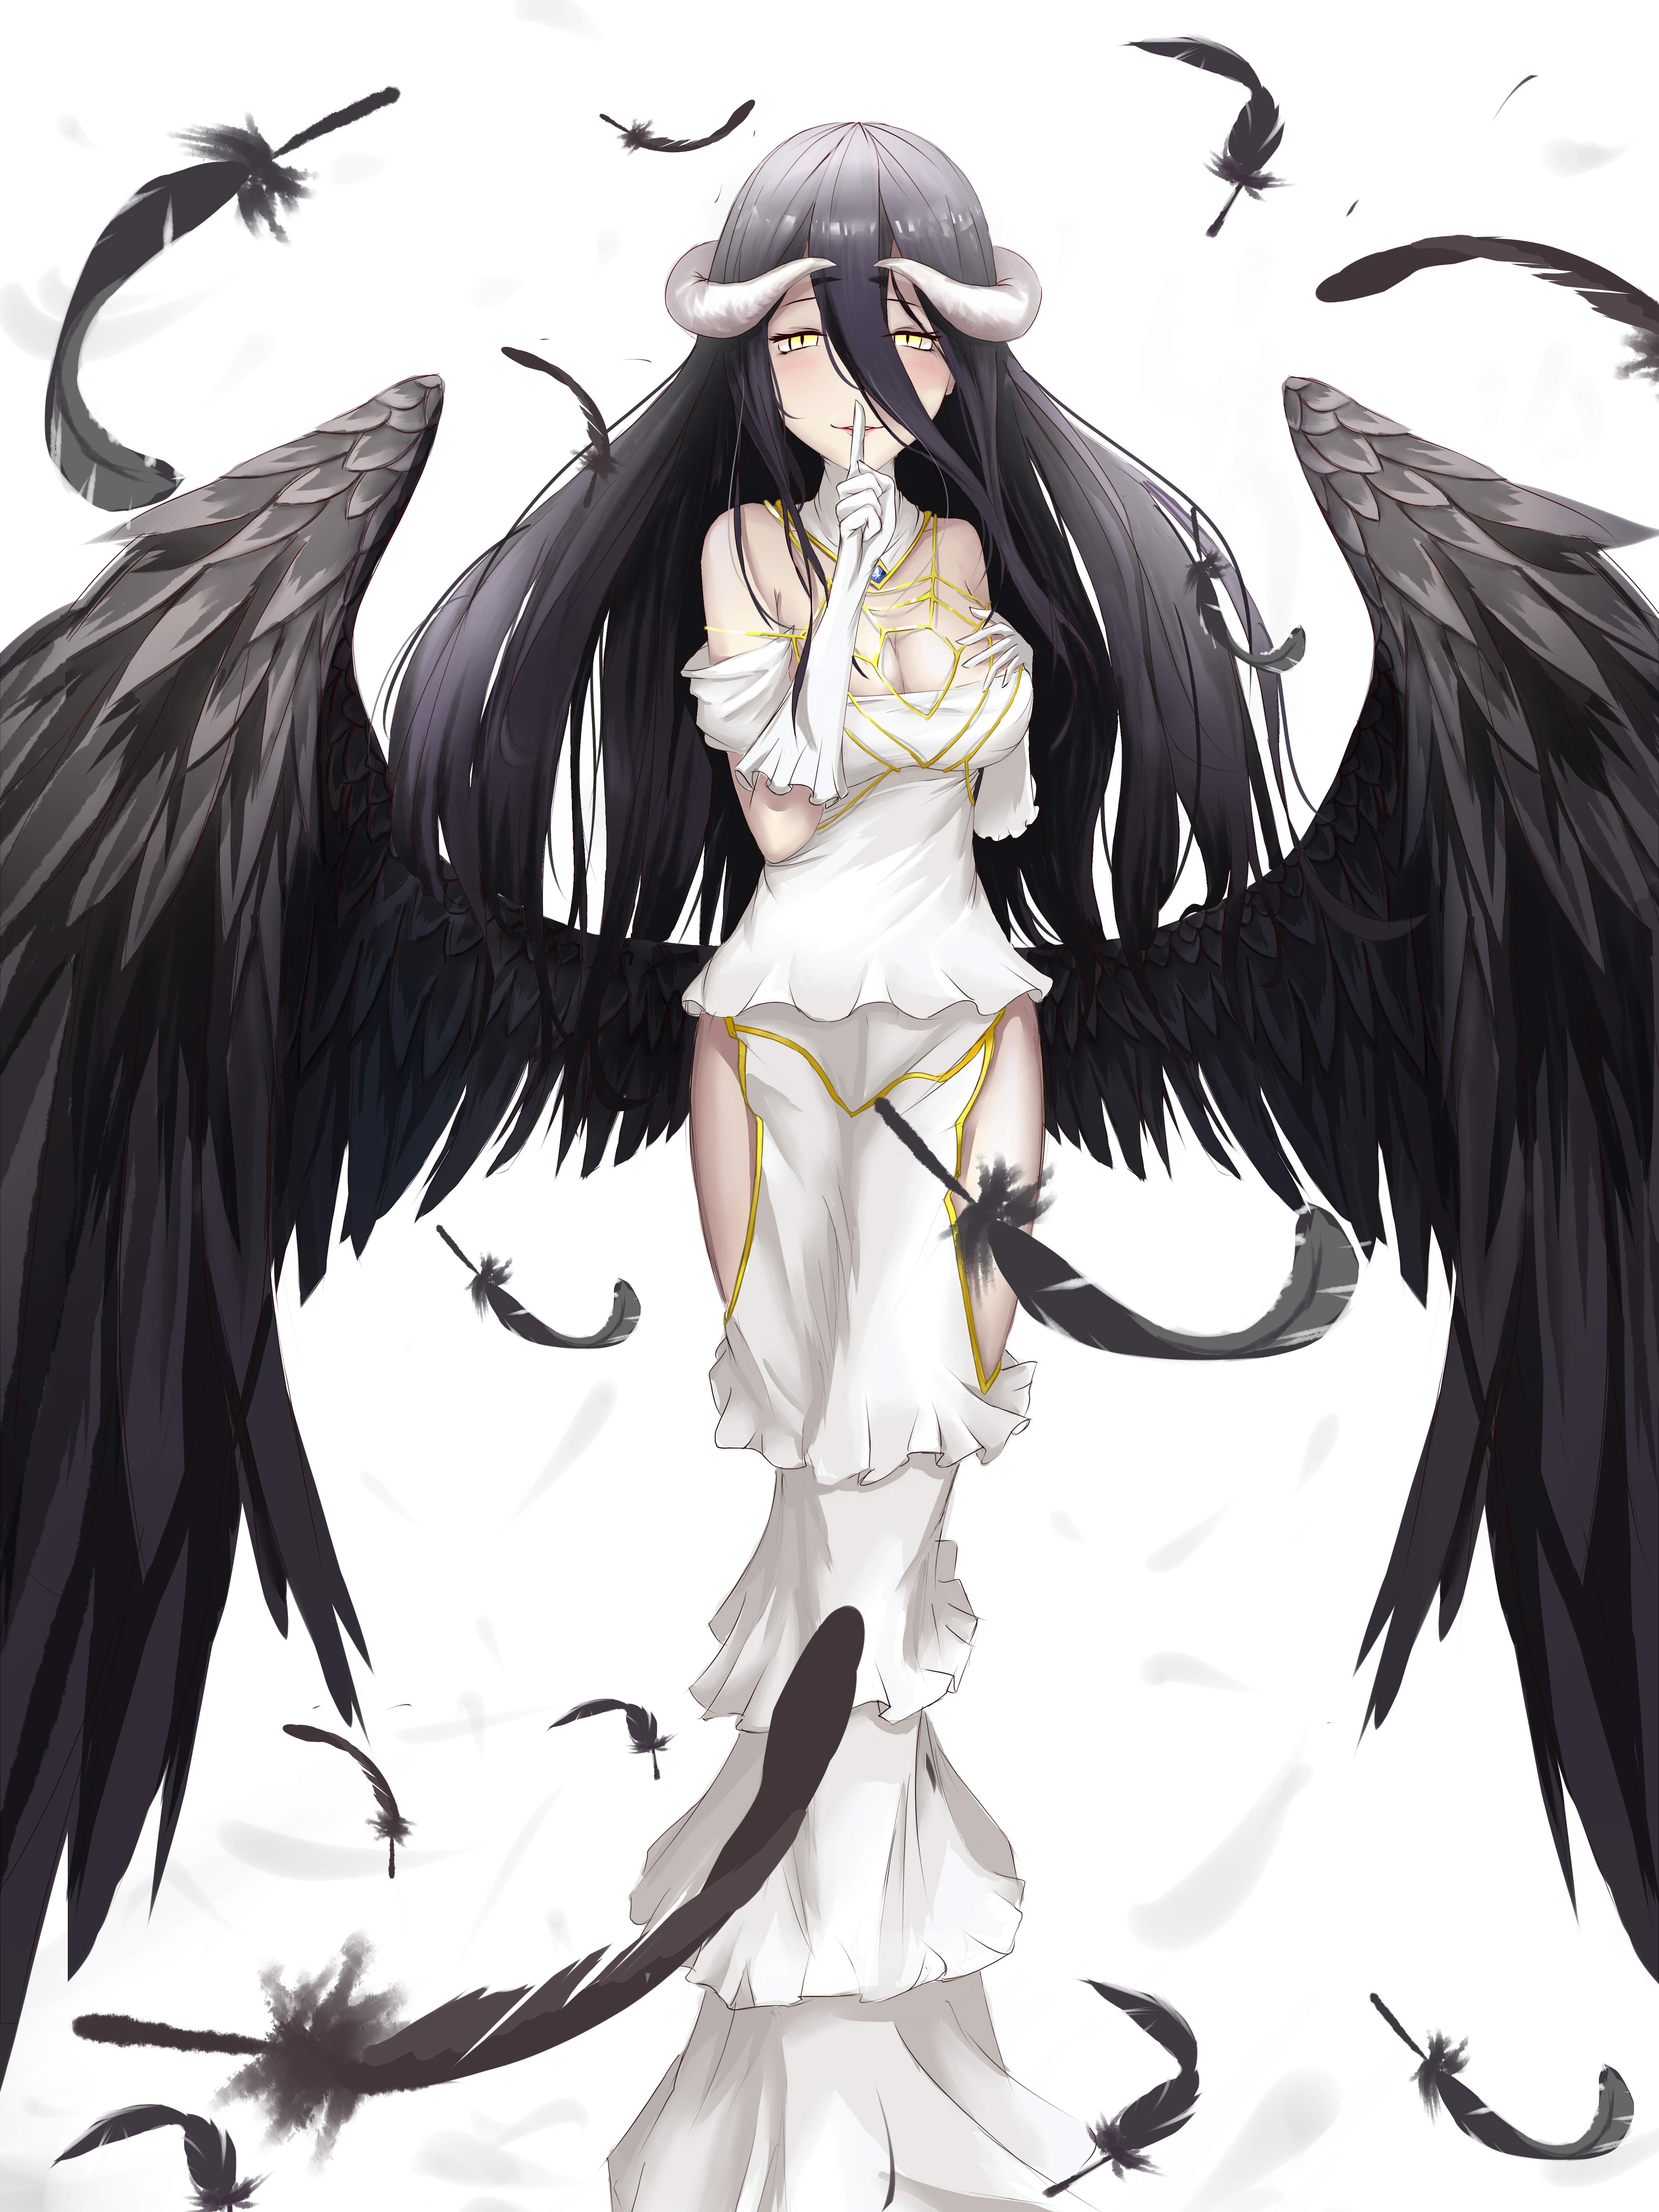 Long Hair Albedo OverLord Overlord Anime Yellow Eyes Horns Black Wings Feathers White Background Whi 4500x6000